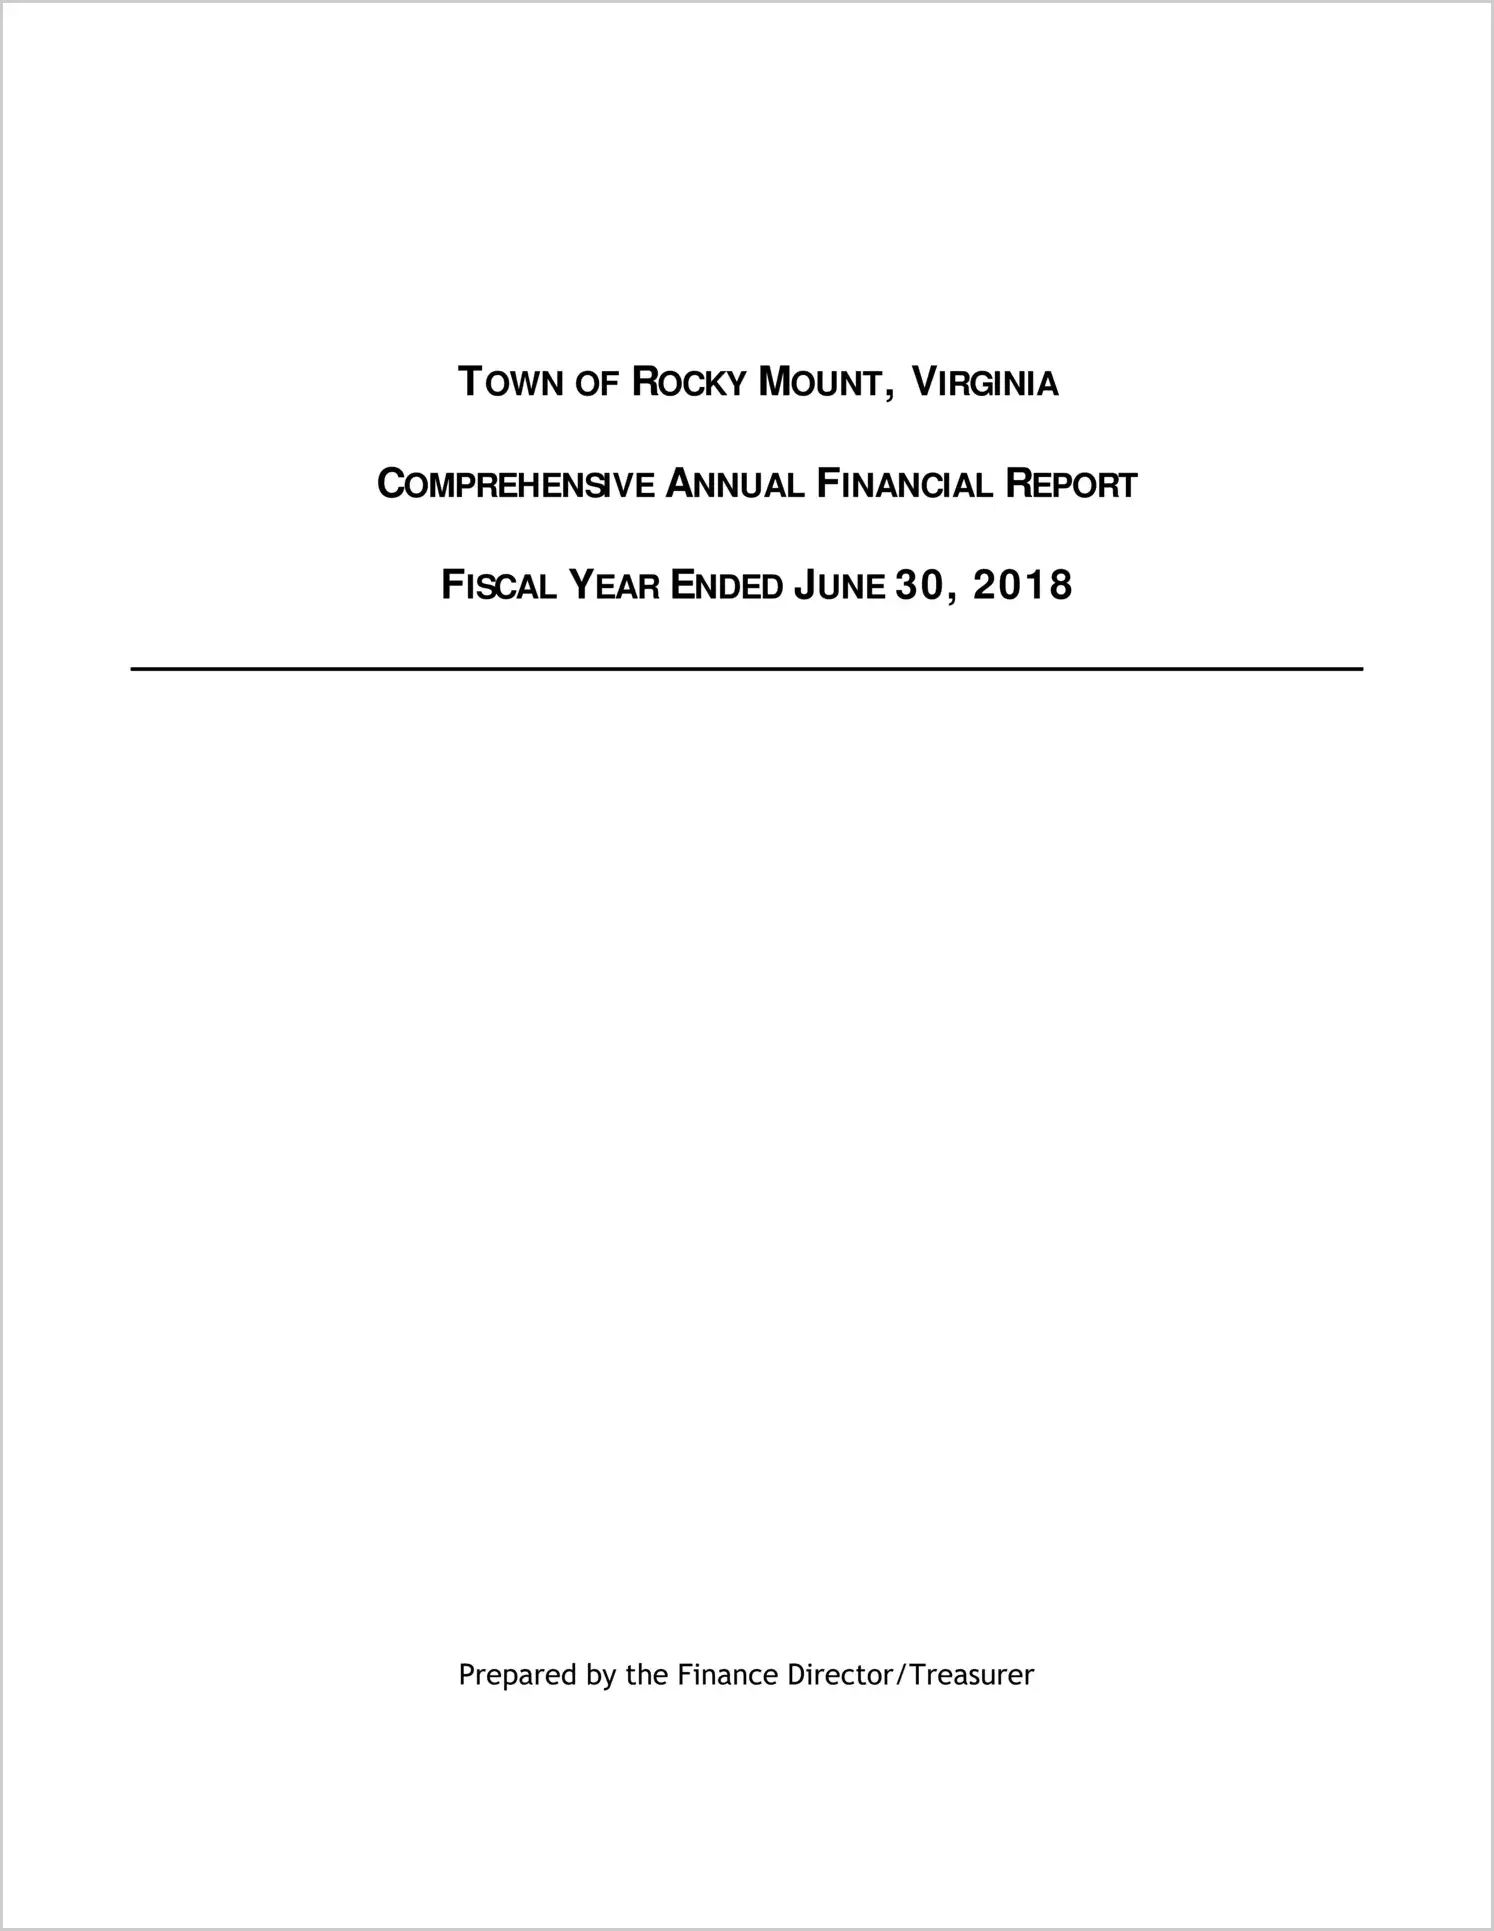 2018 Annual Financial Report for Town of Rocky Mount